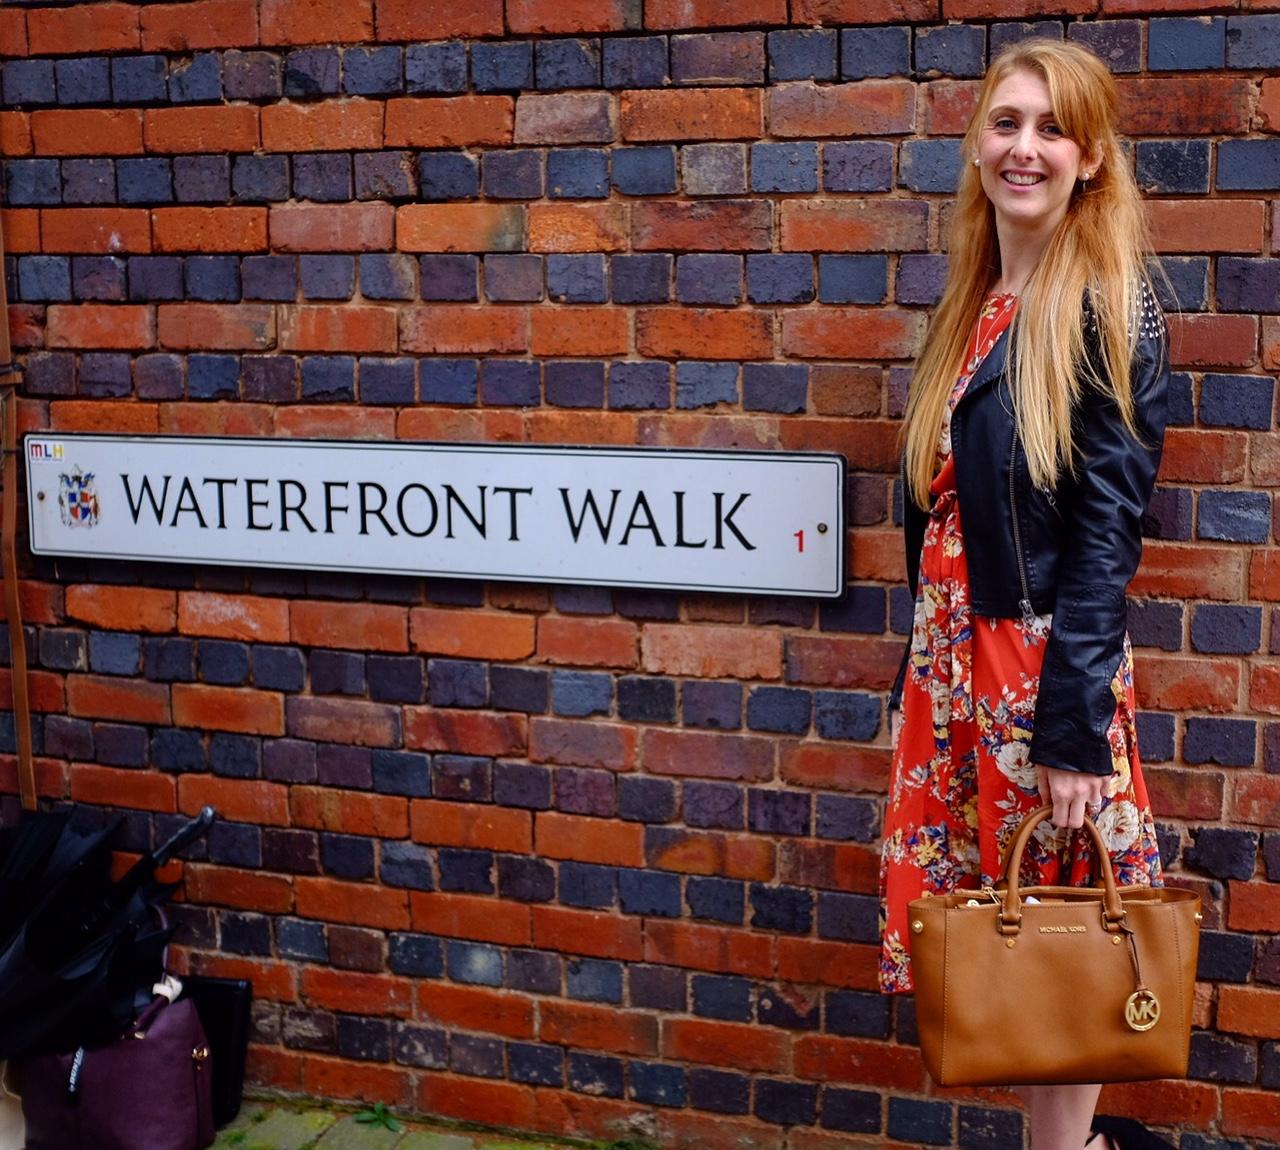 waterfront walk sign. and girl